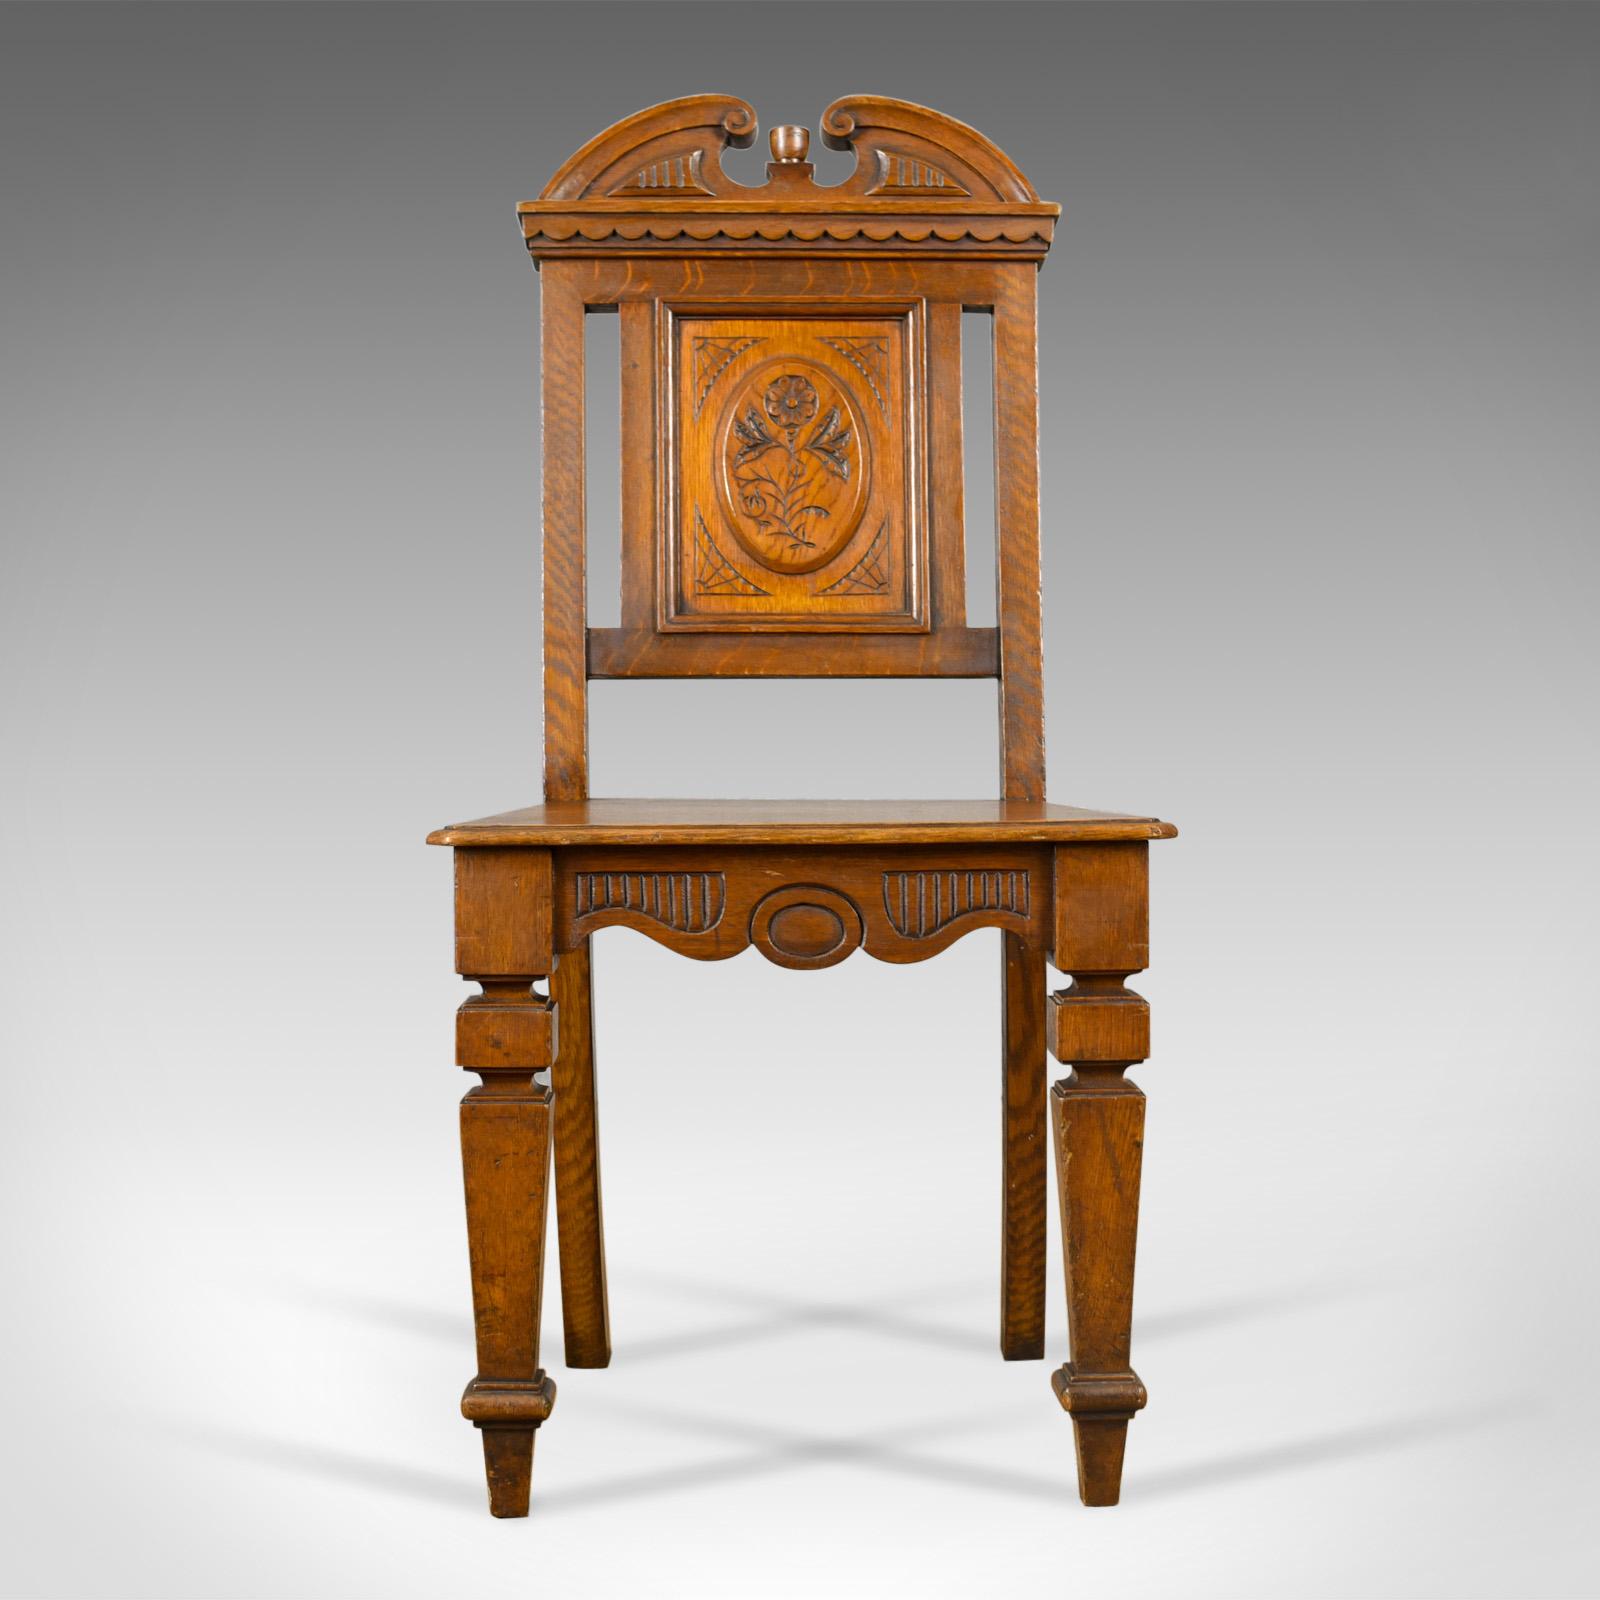 This is an antique hall chair in oak, a Scottish, Victorian side chair dating to the late 19th century, circa 1870. 

Attractive honey hues to the well figured oak
Solidly jointed with a wax polished finish
Of quality craftsmanship with a